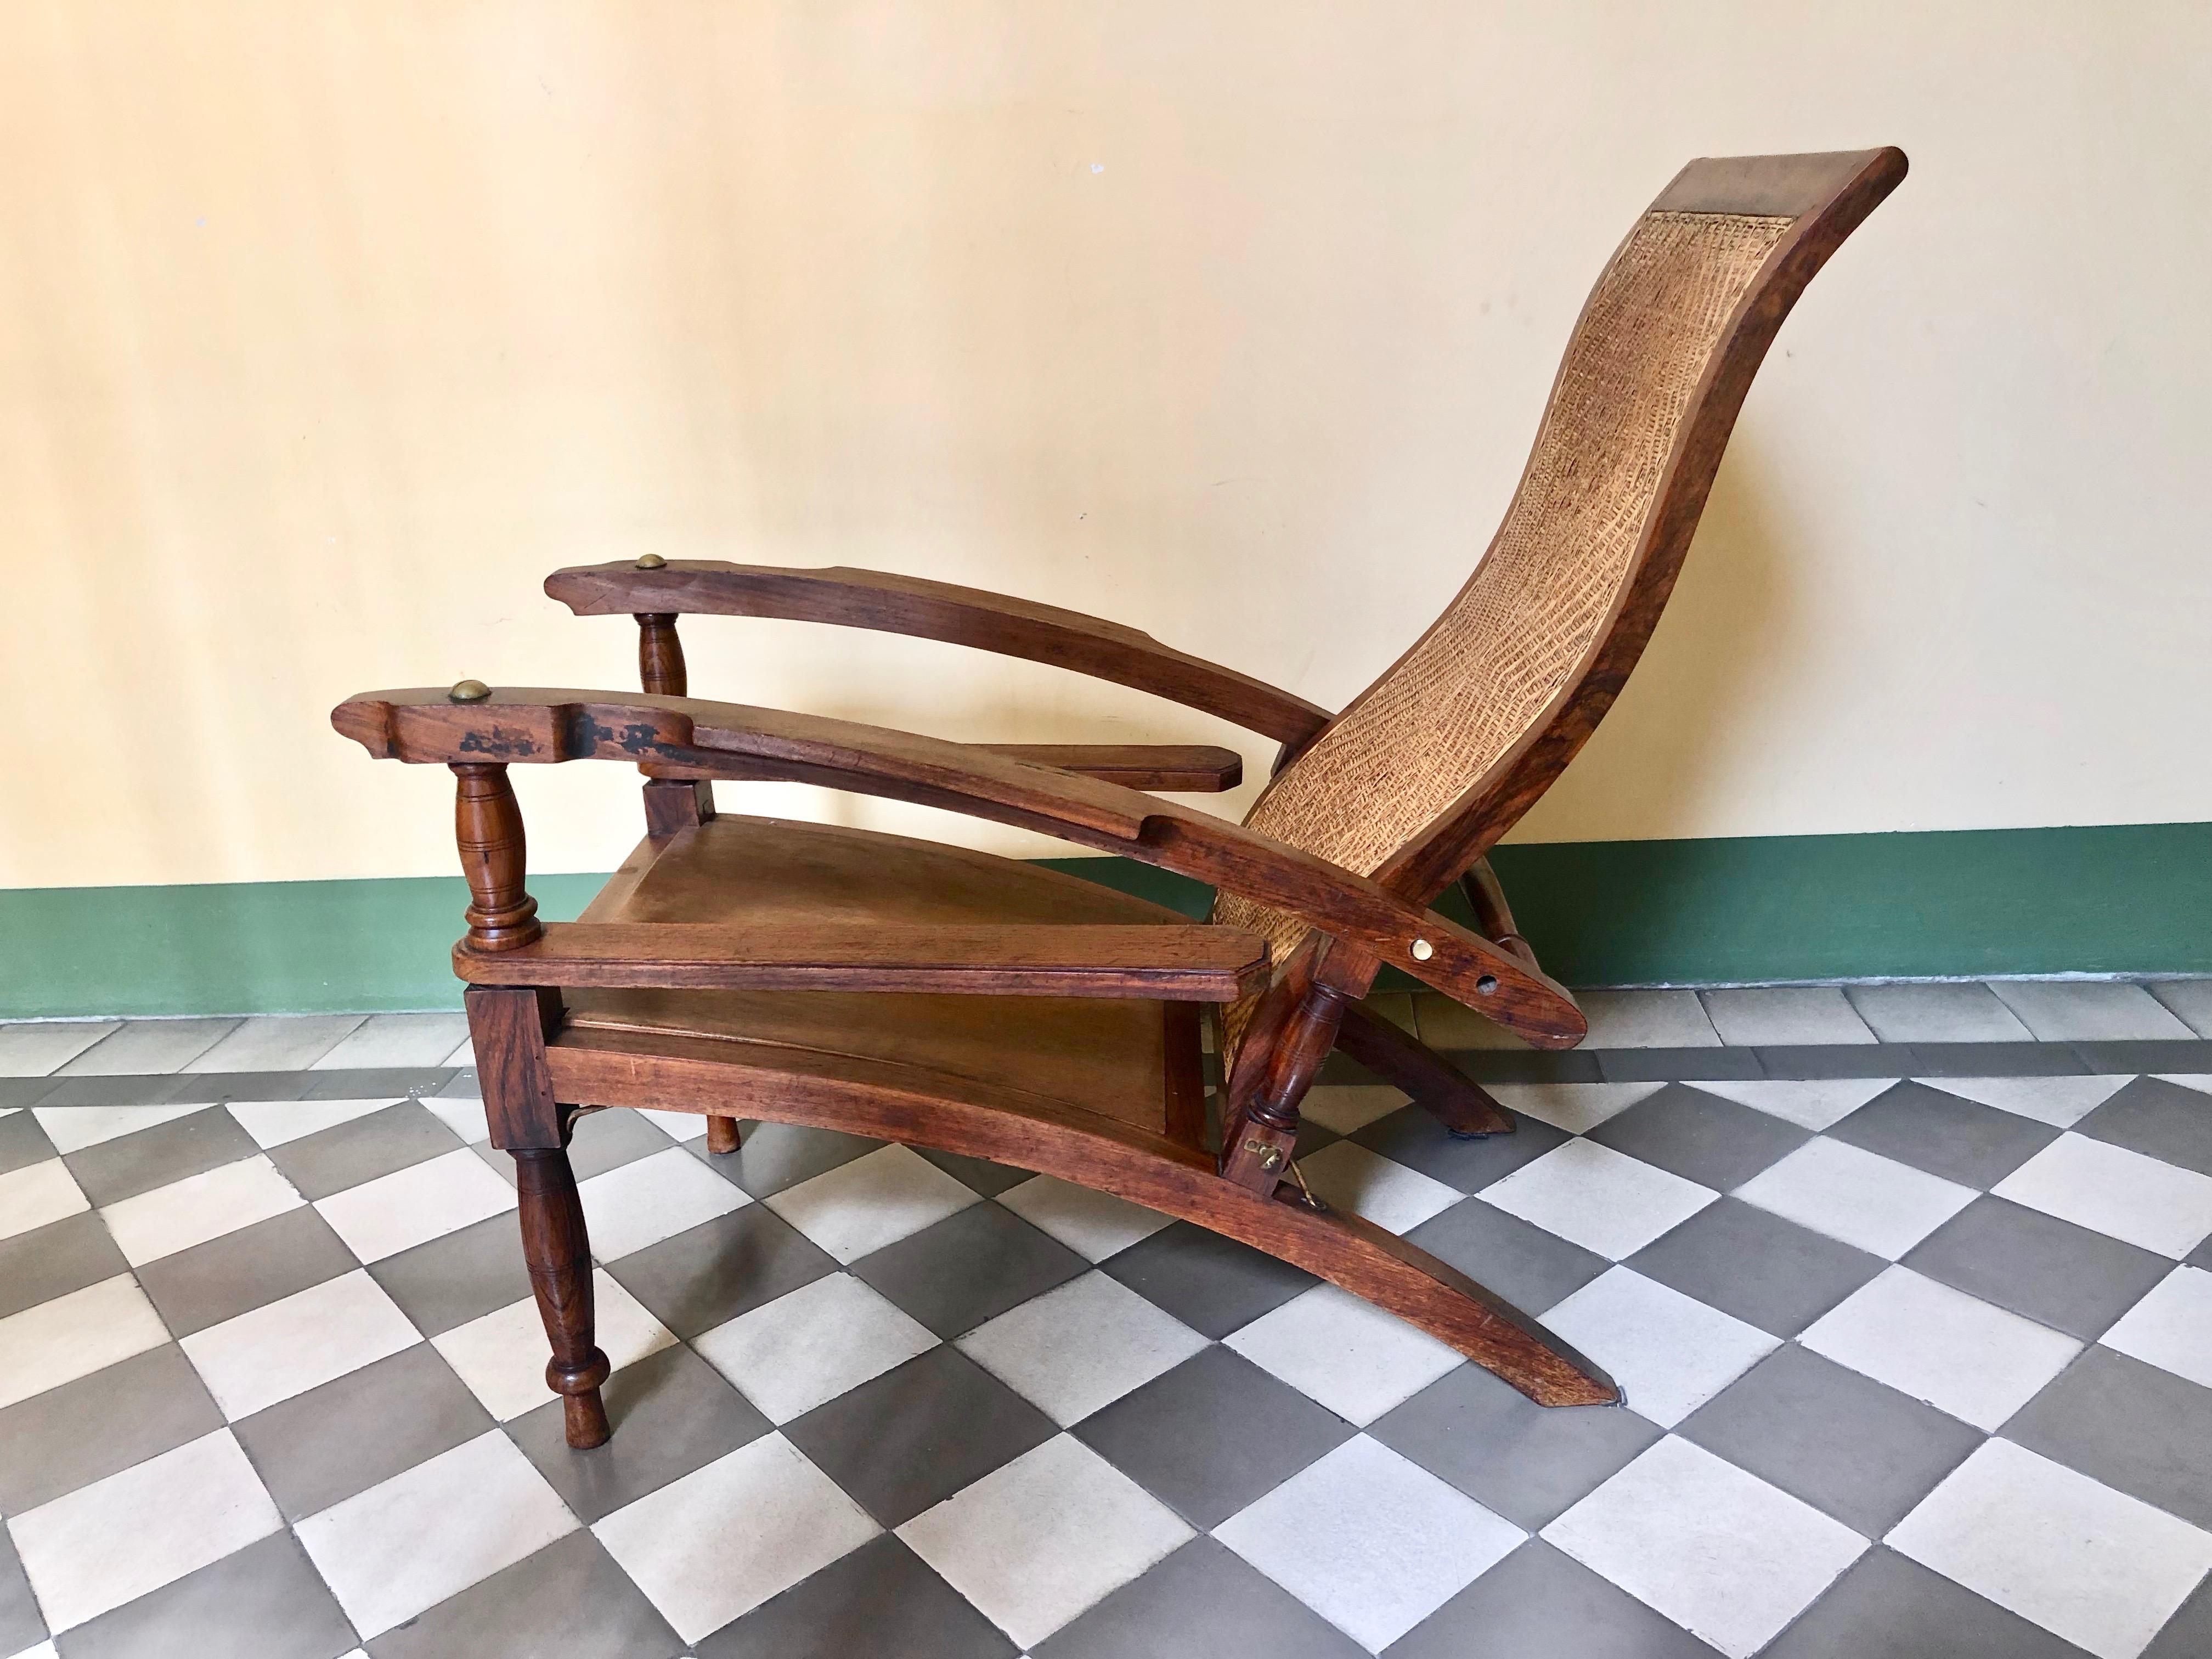 Joinery Unique Jugendstil Arm Chair made in 1908 For Sale